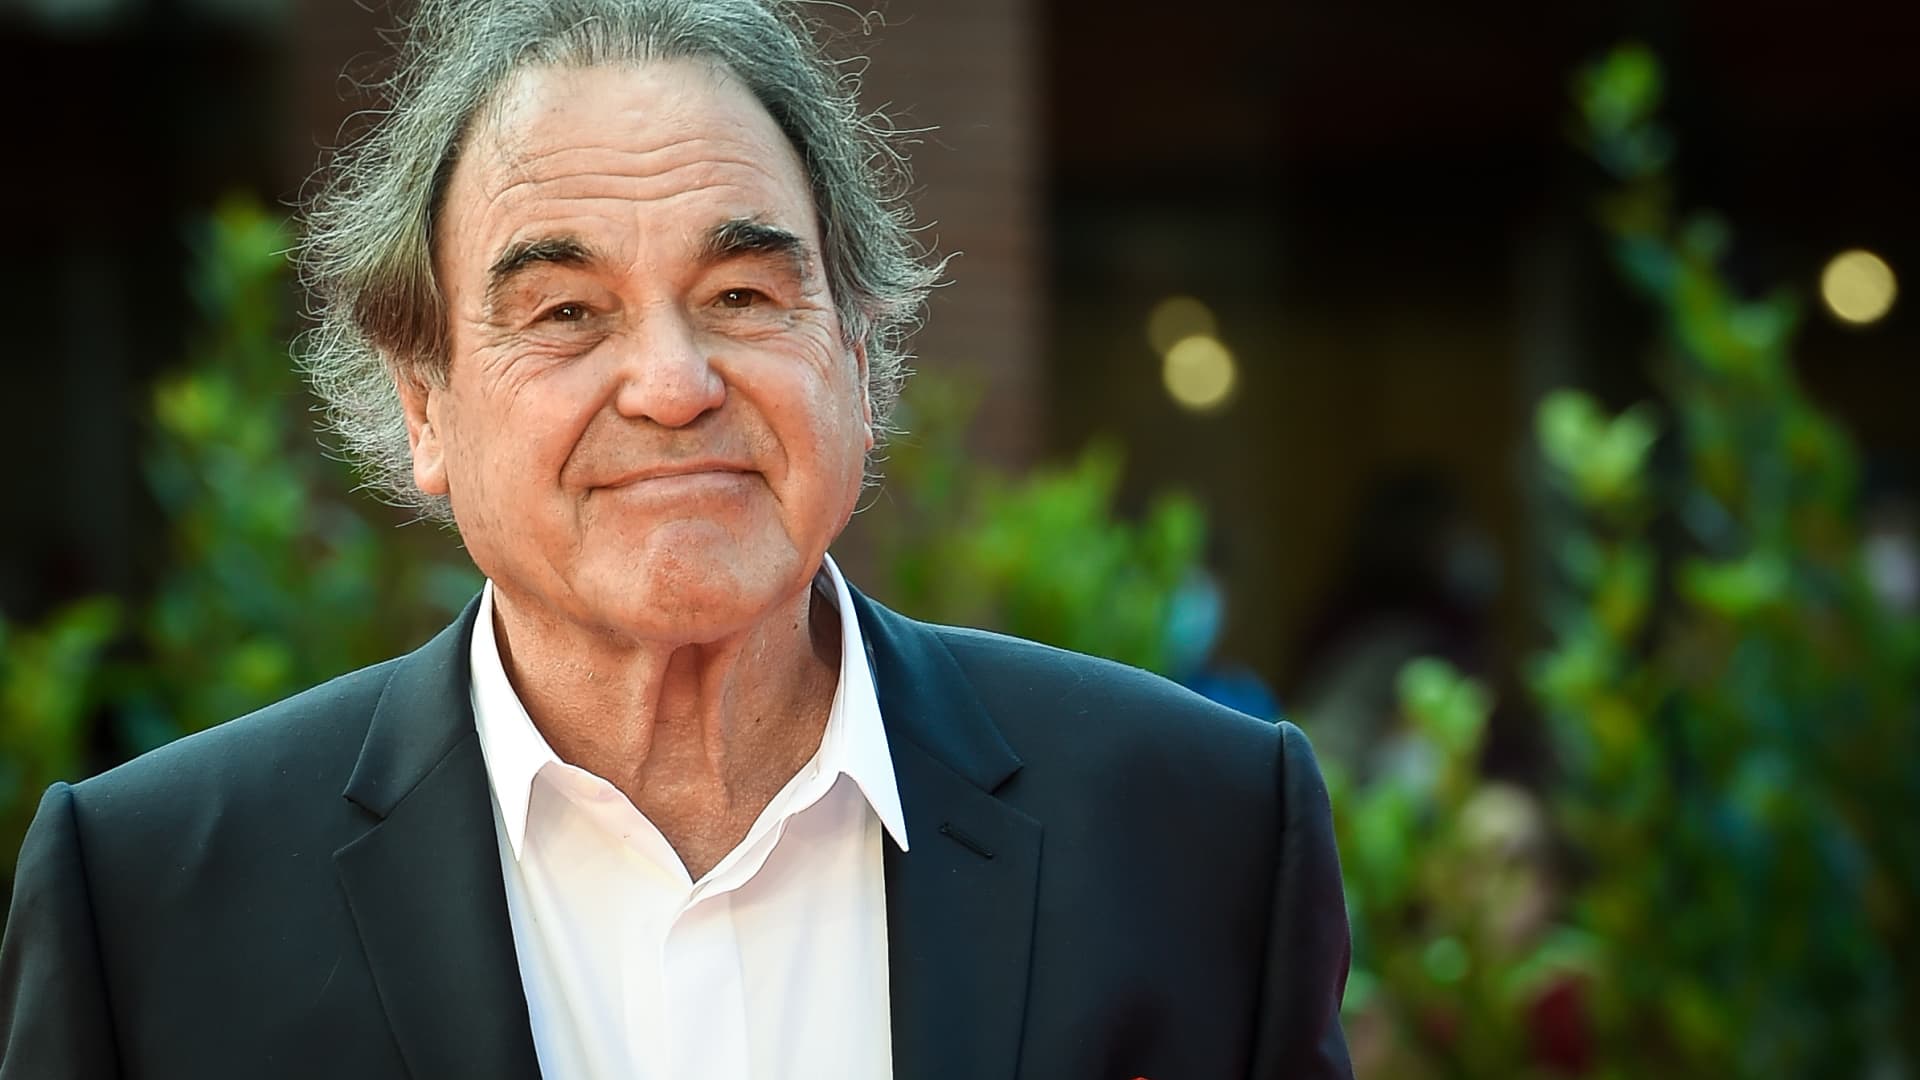 Filmmaker Oliver Stone slams environmental movement over ‘destructive’ actions on nuclear